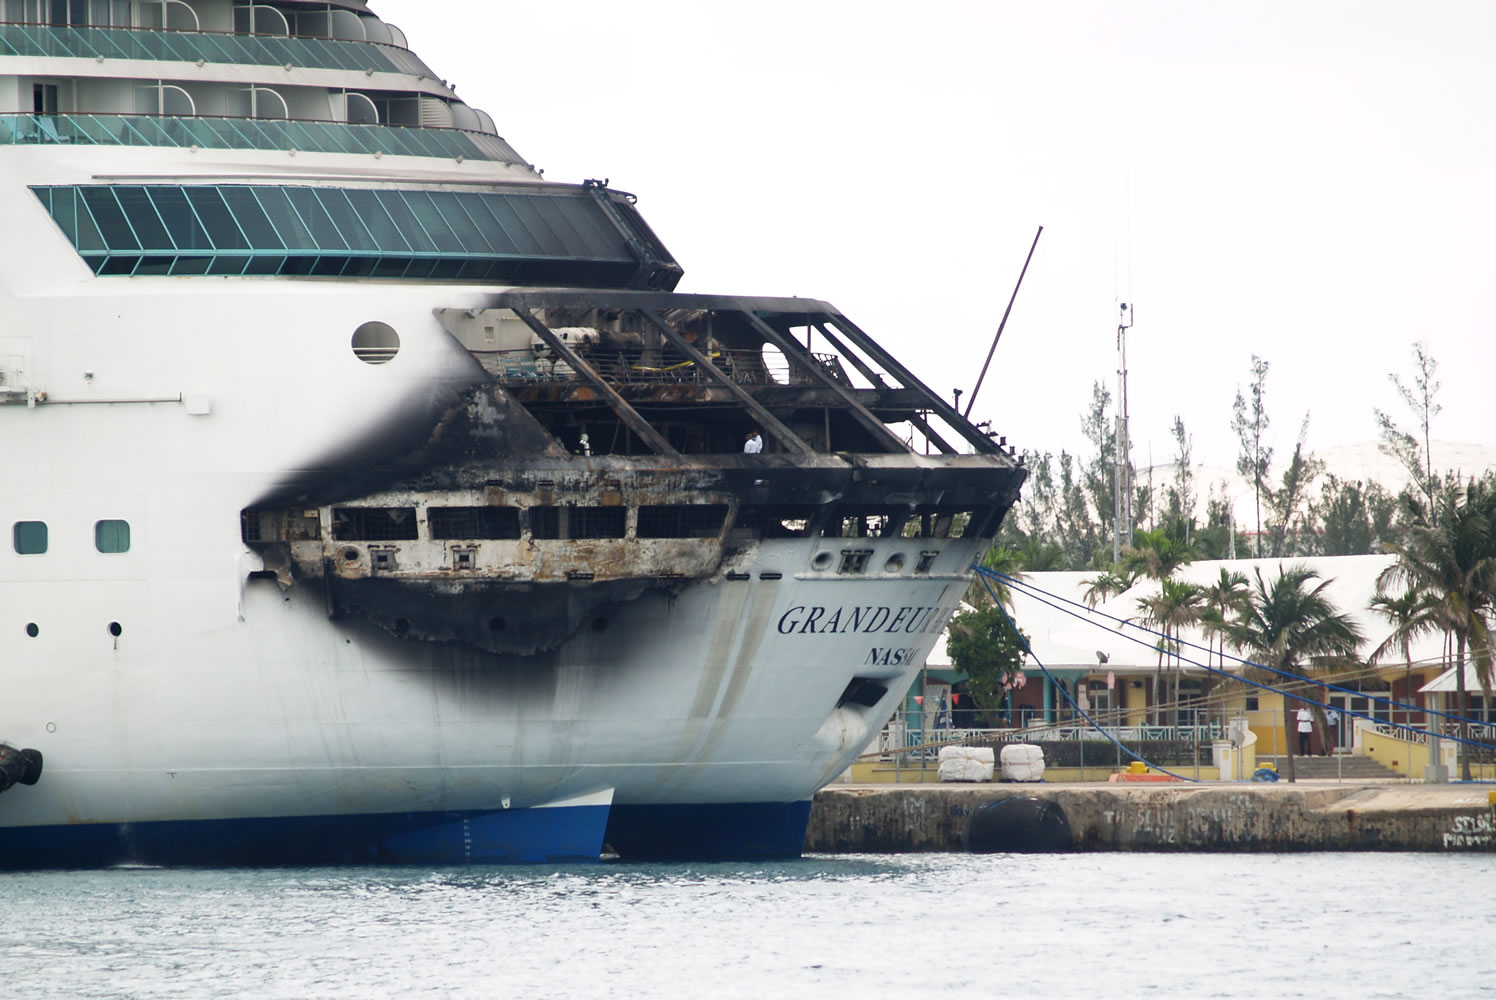 The fire-damaged exterior of Royal Caribbean's Grandeur of the Seas cruise ship is seen while docked in Freeport, Grand Bahama island, on Monday.